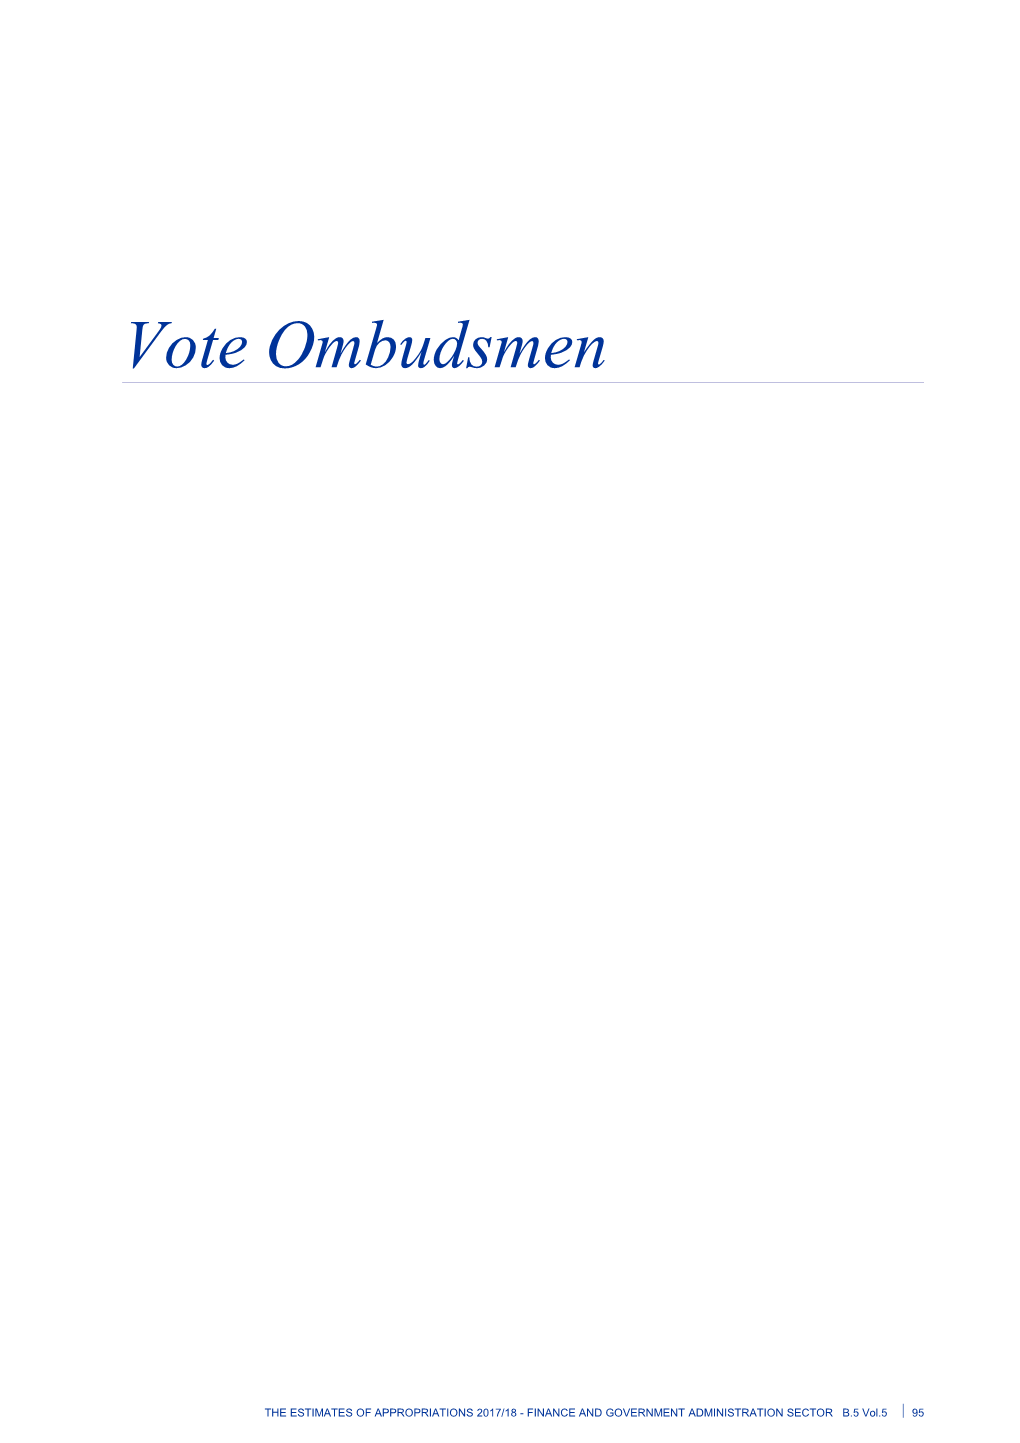 Vote Ombudsmen - Vol 5 Finance and Government Administration Sector - the Estimates Of